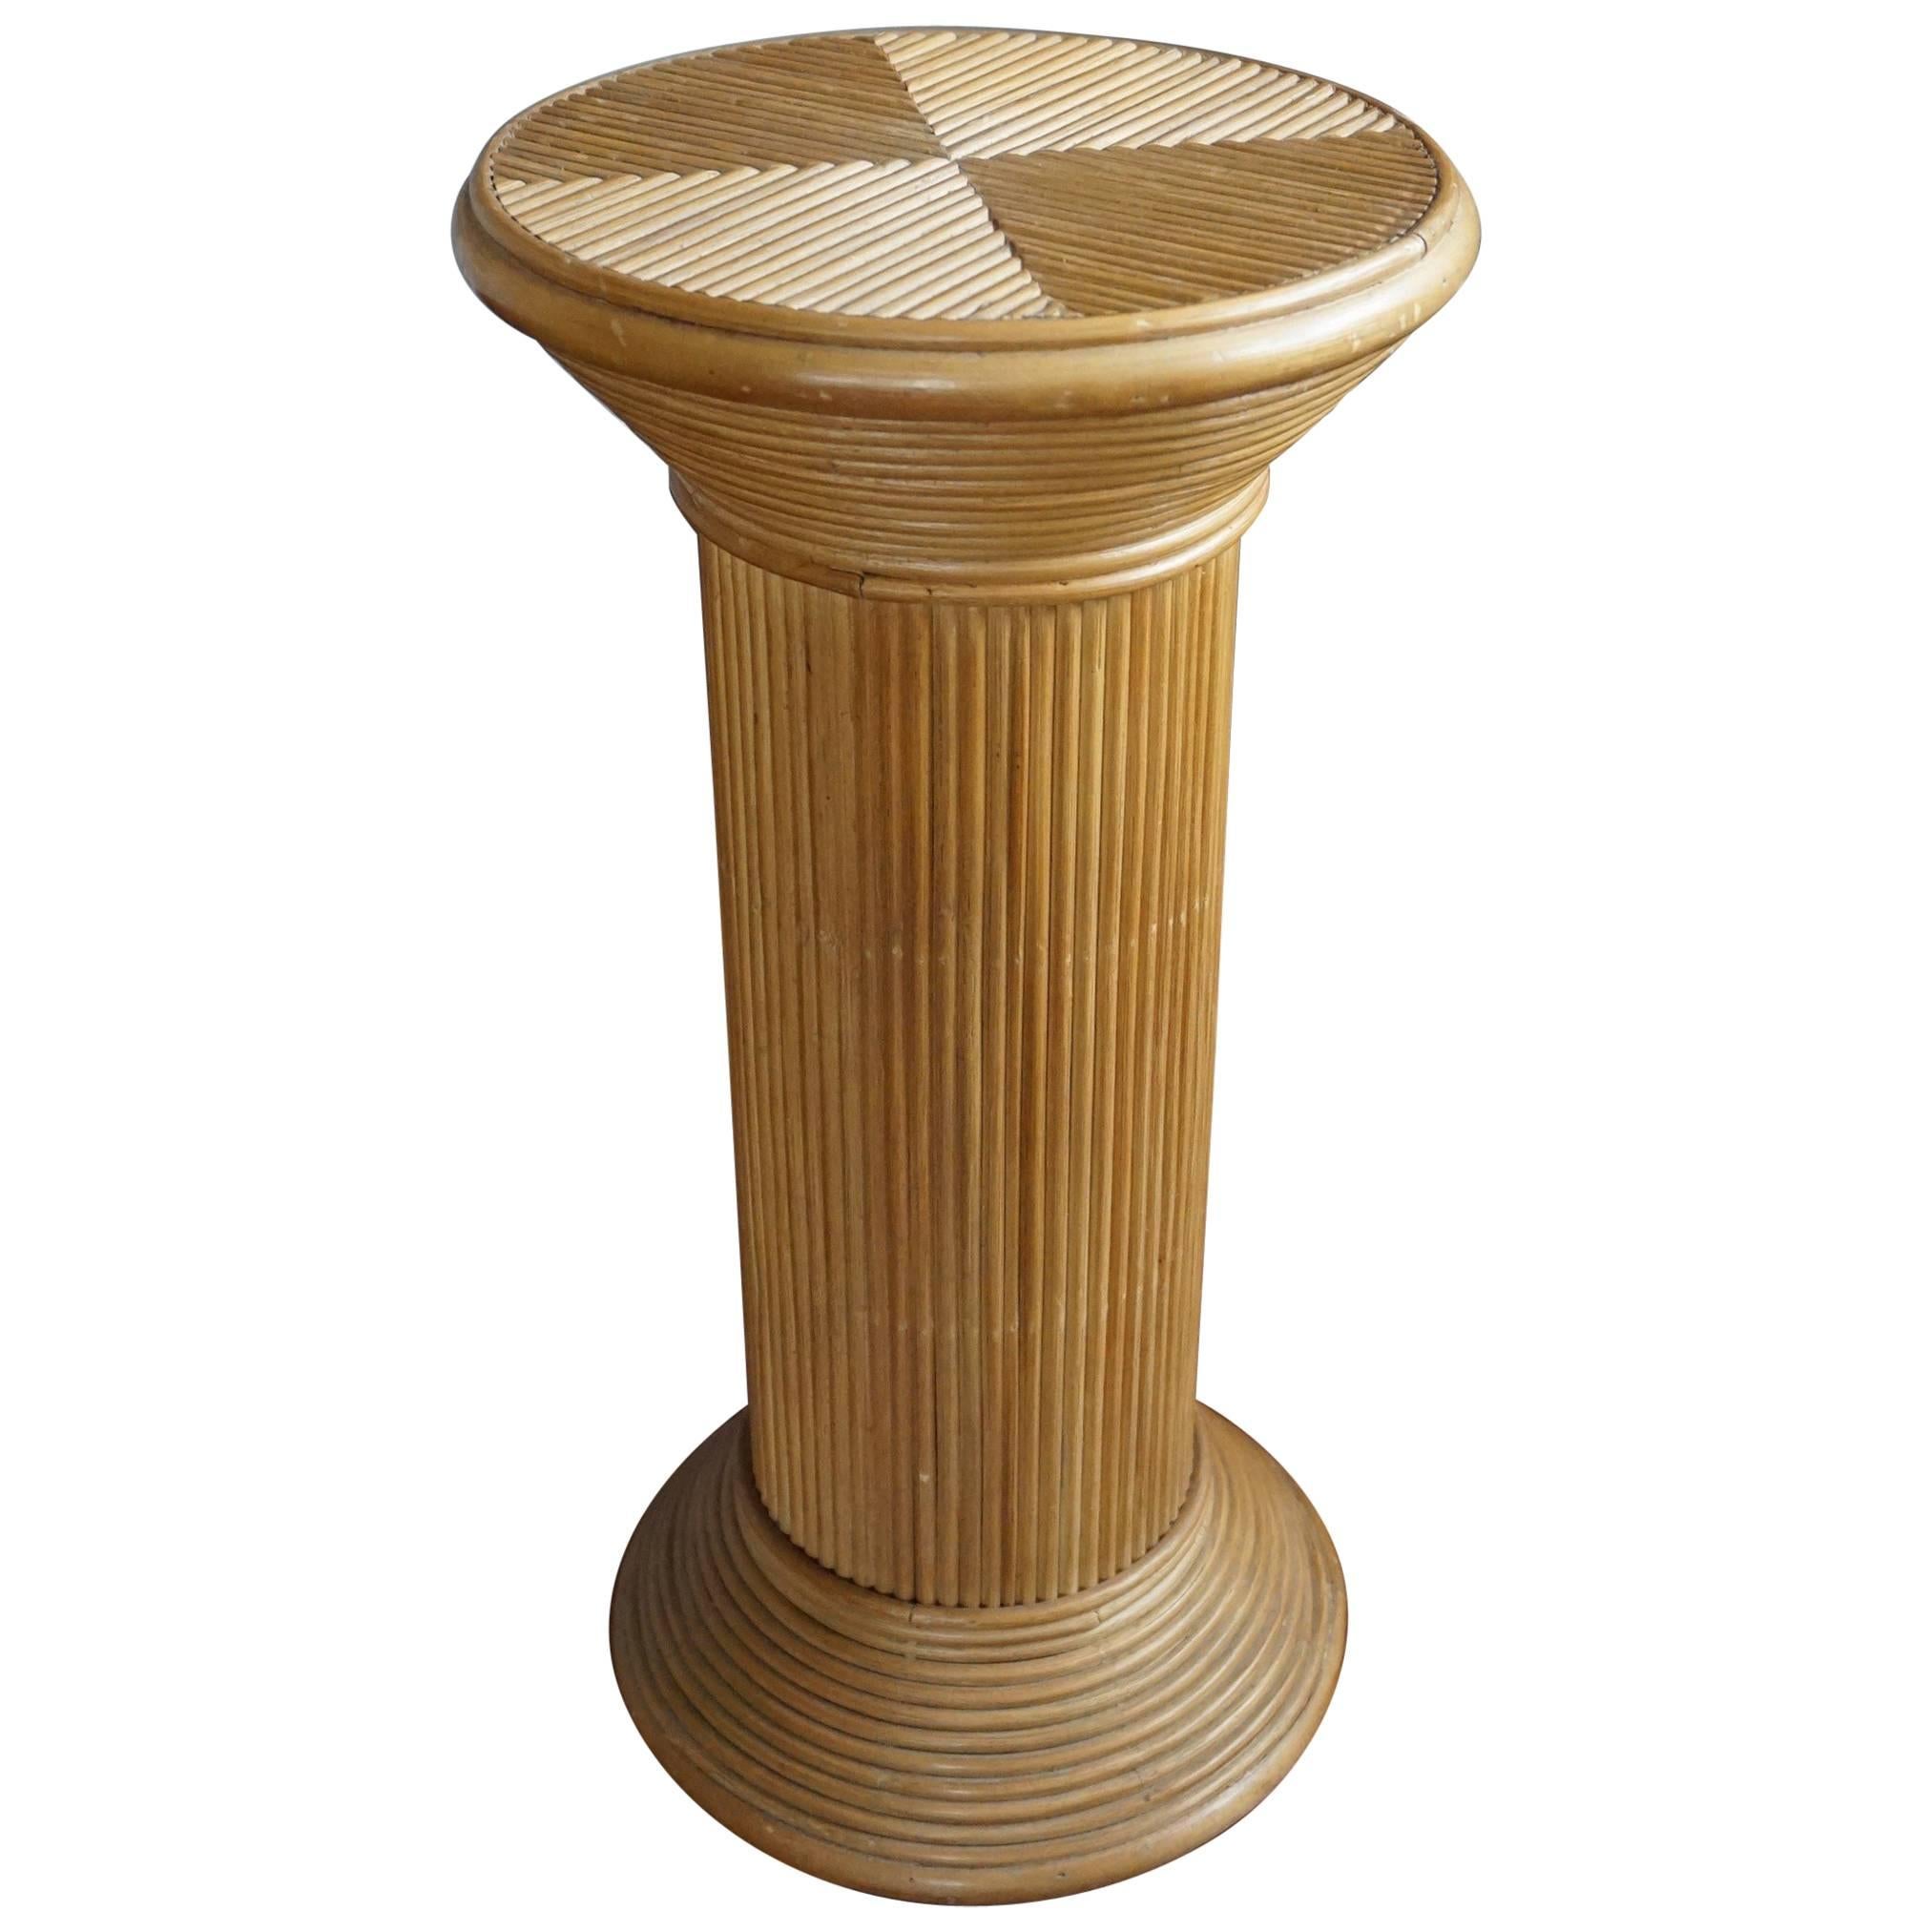 Hand Crafted and Stylish Mid-Century Rattan Pedestal / Plant Stand / Column